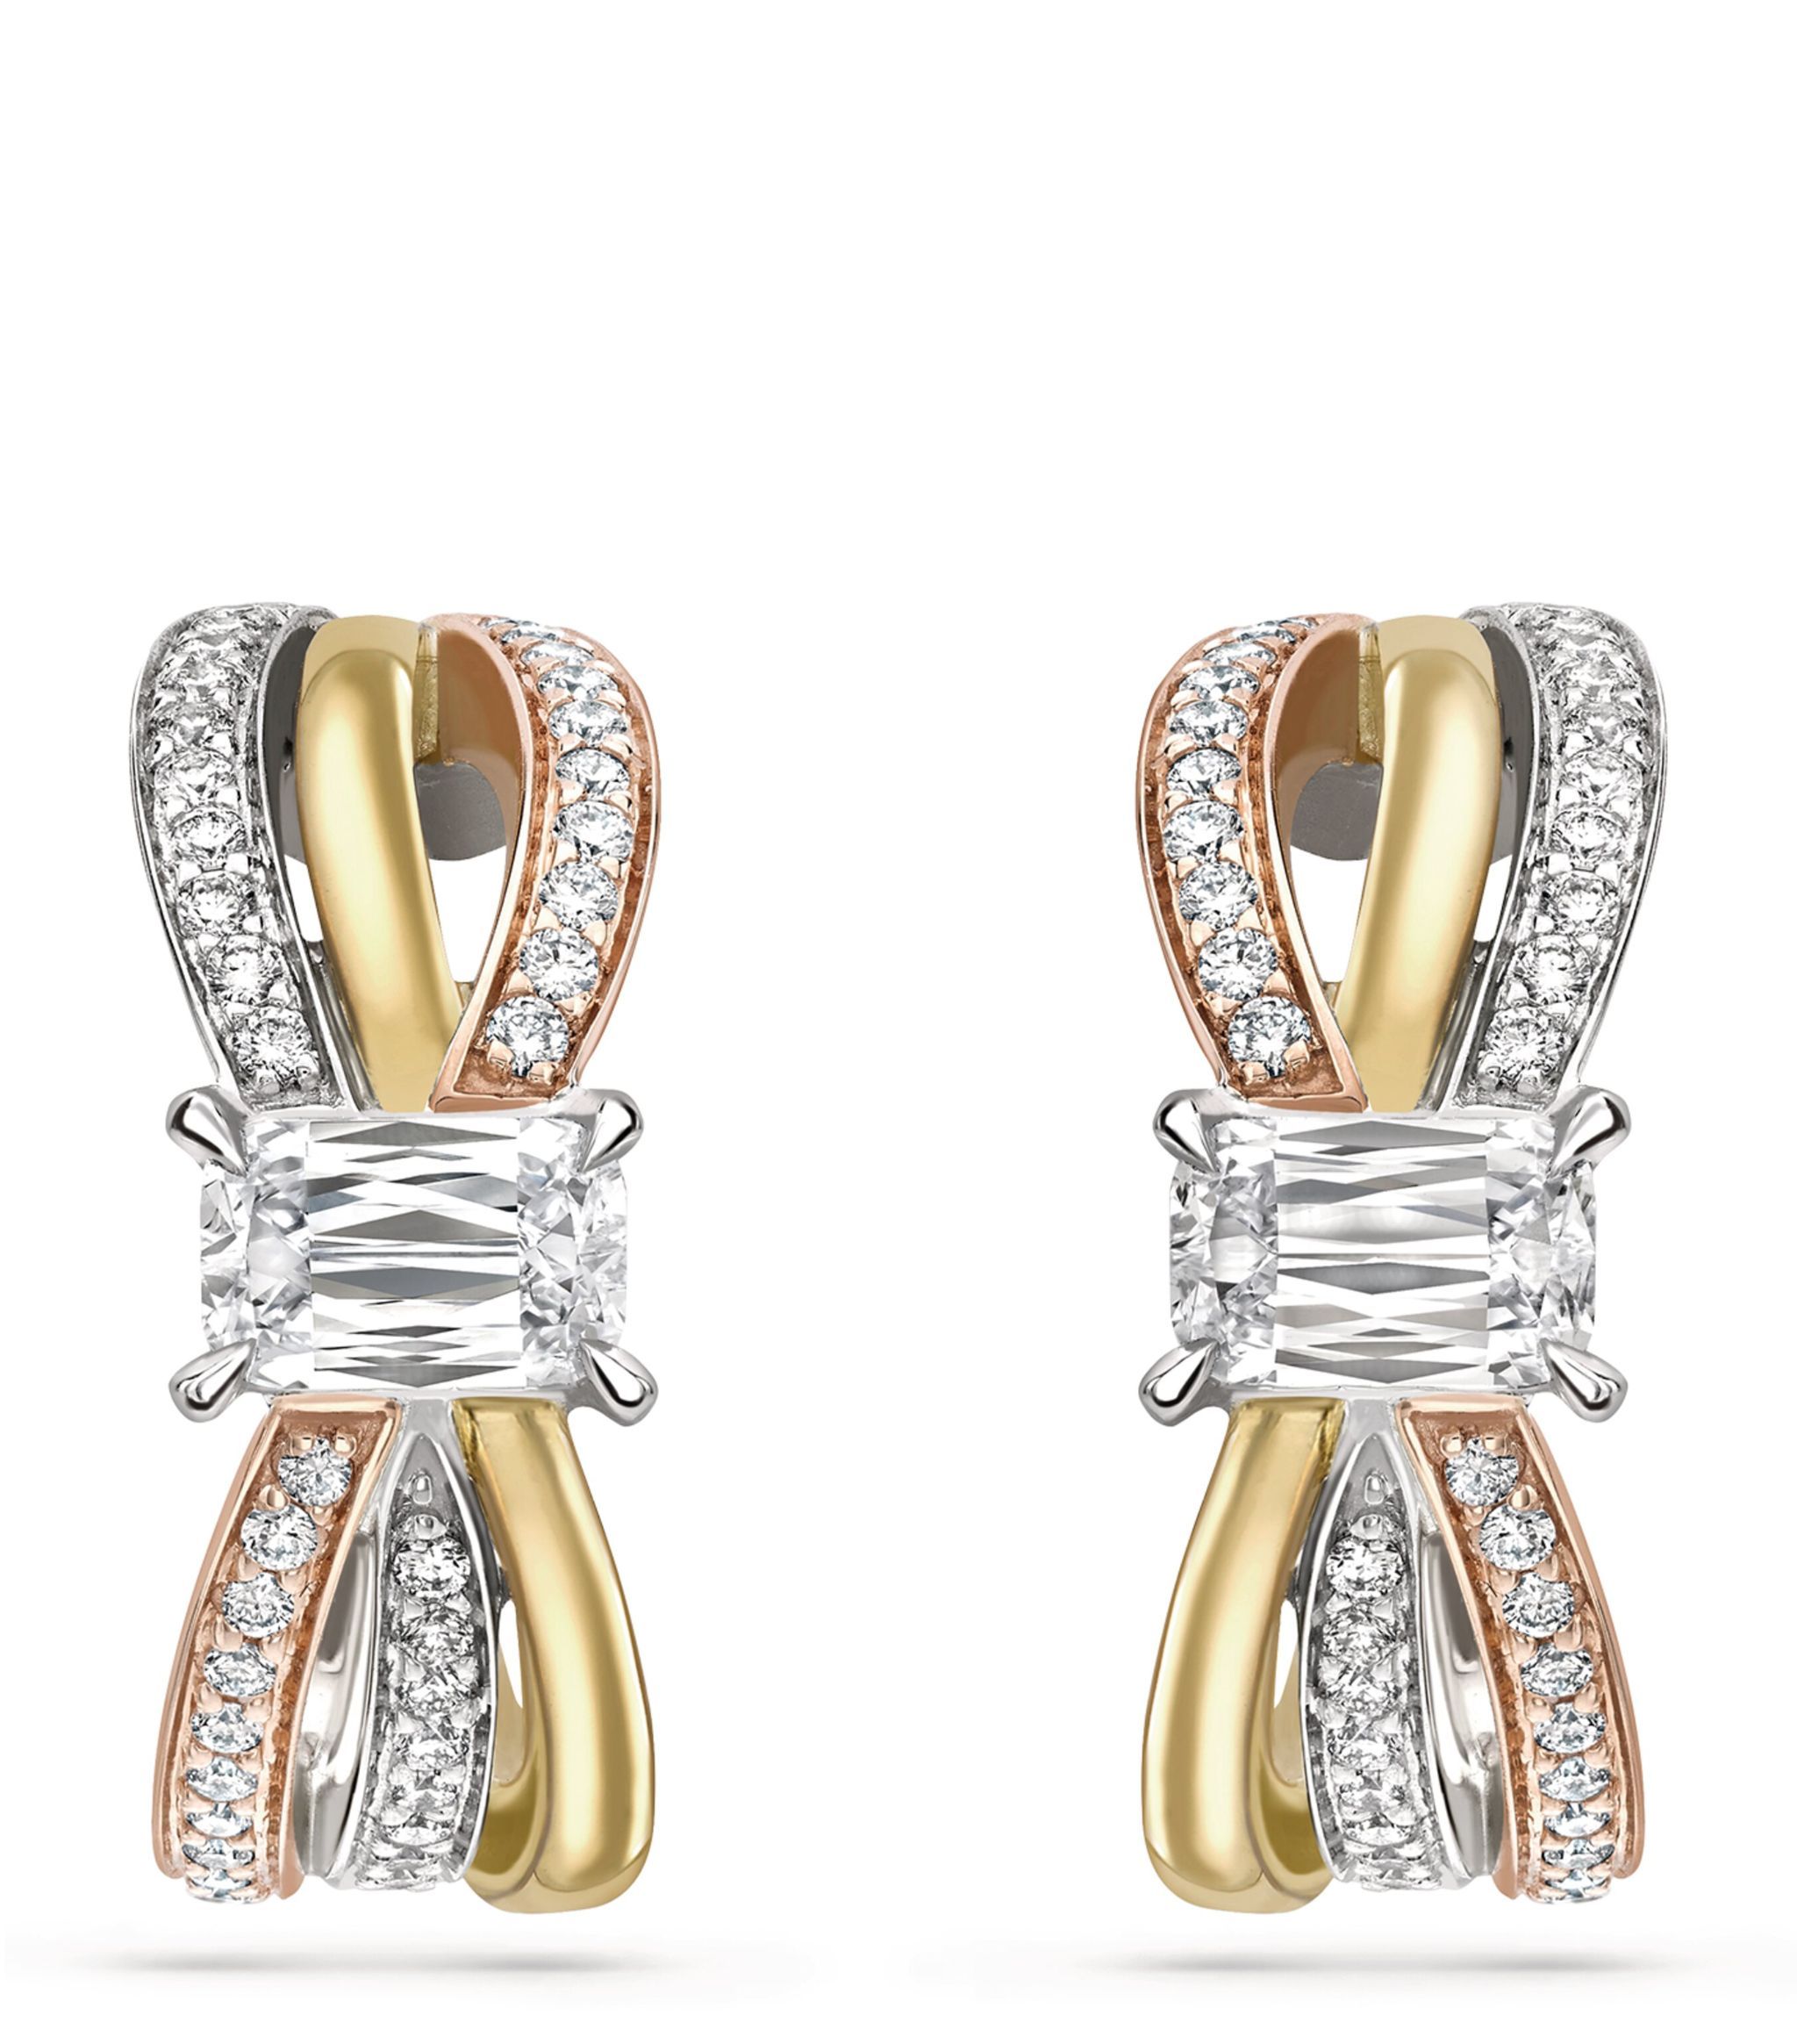 Mixed Gold, Platinum and Diamond Ribbons Earrings | Harrods